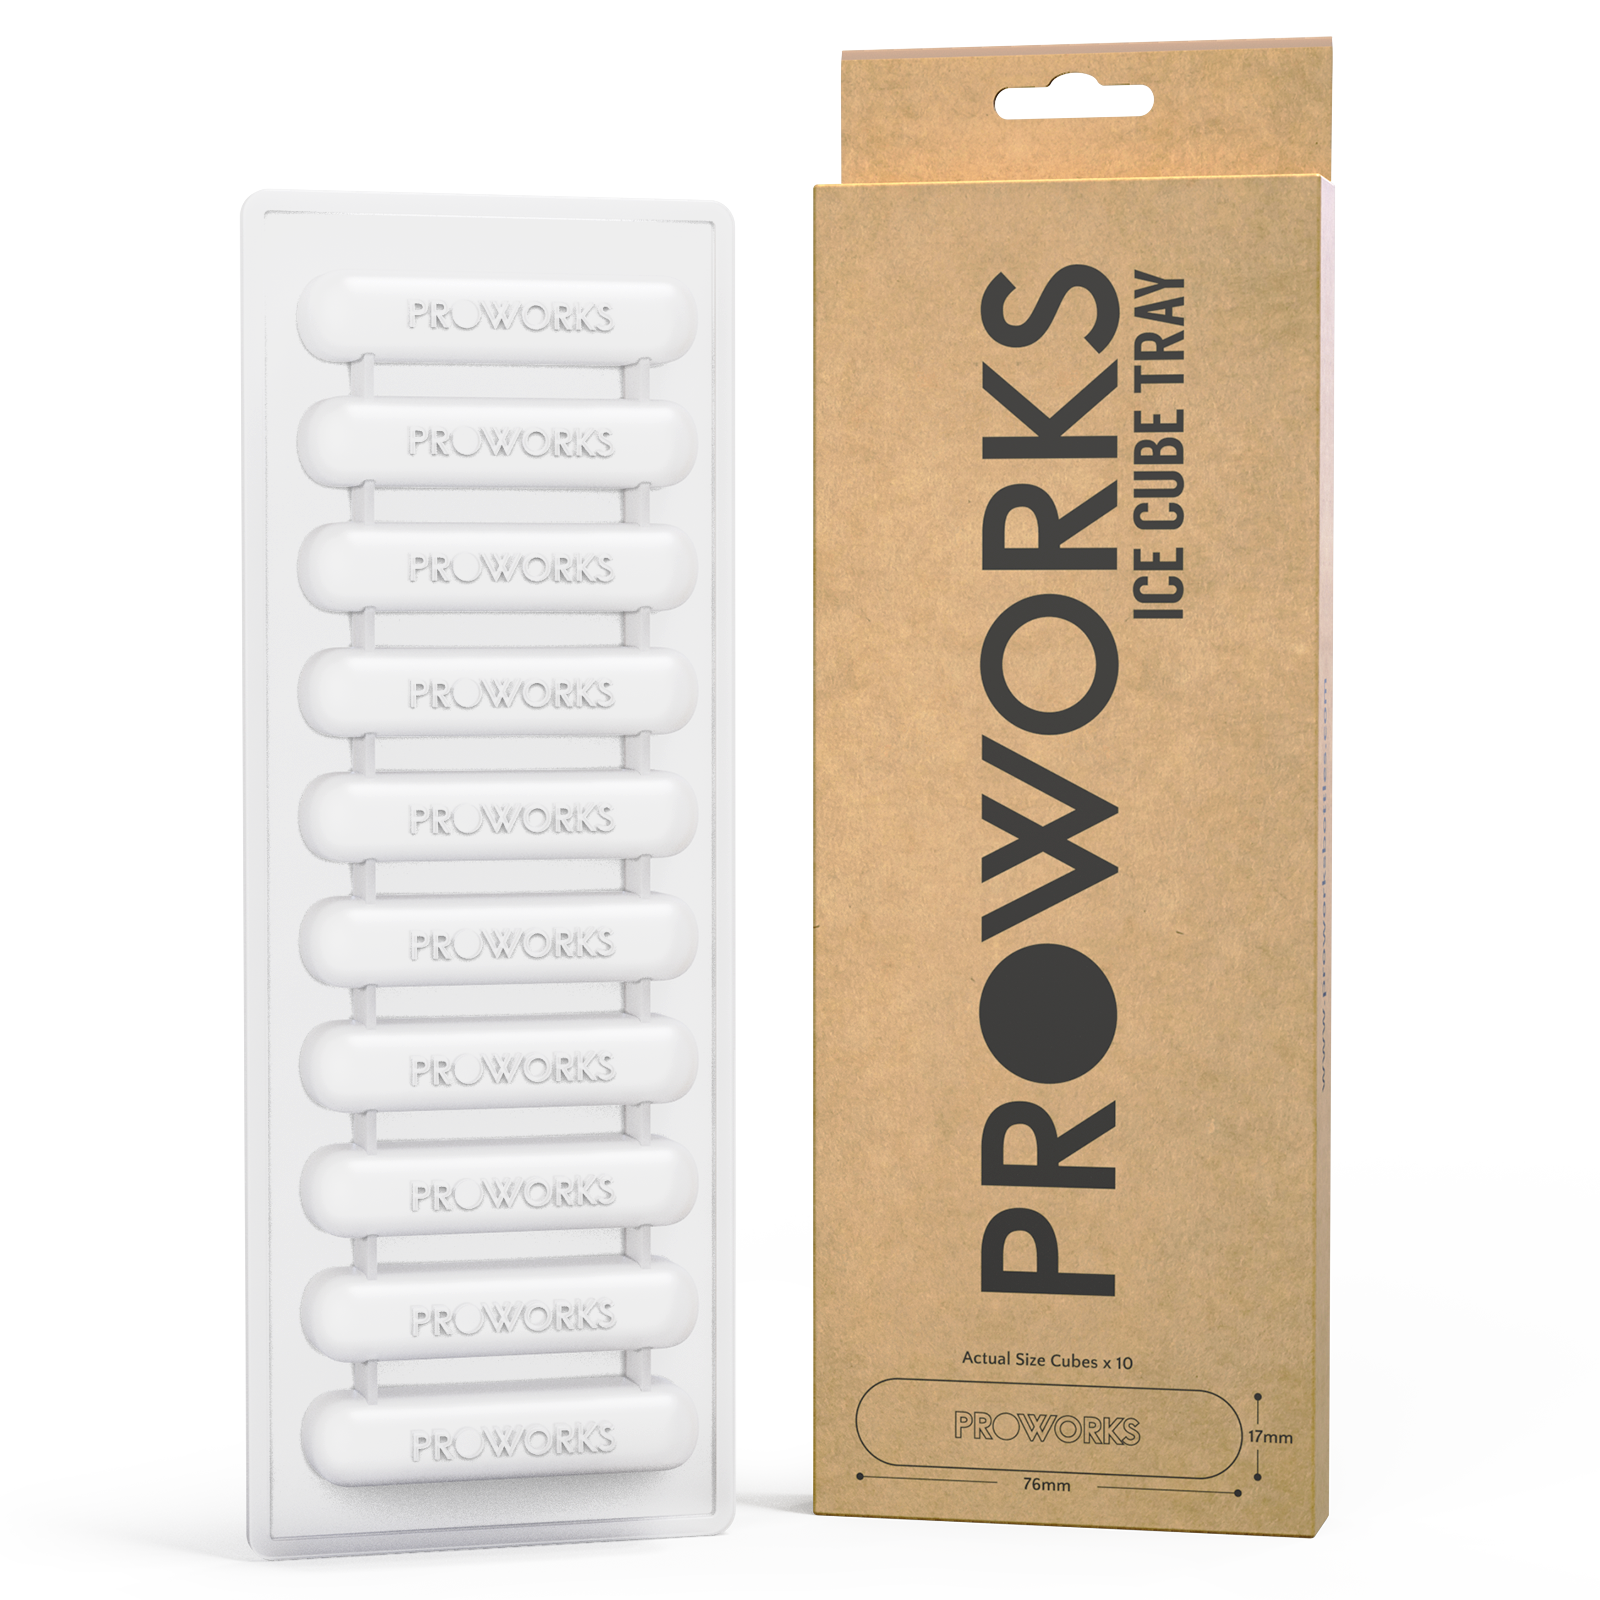 Proworks Ice Cube Tray